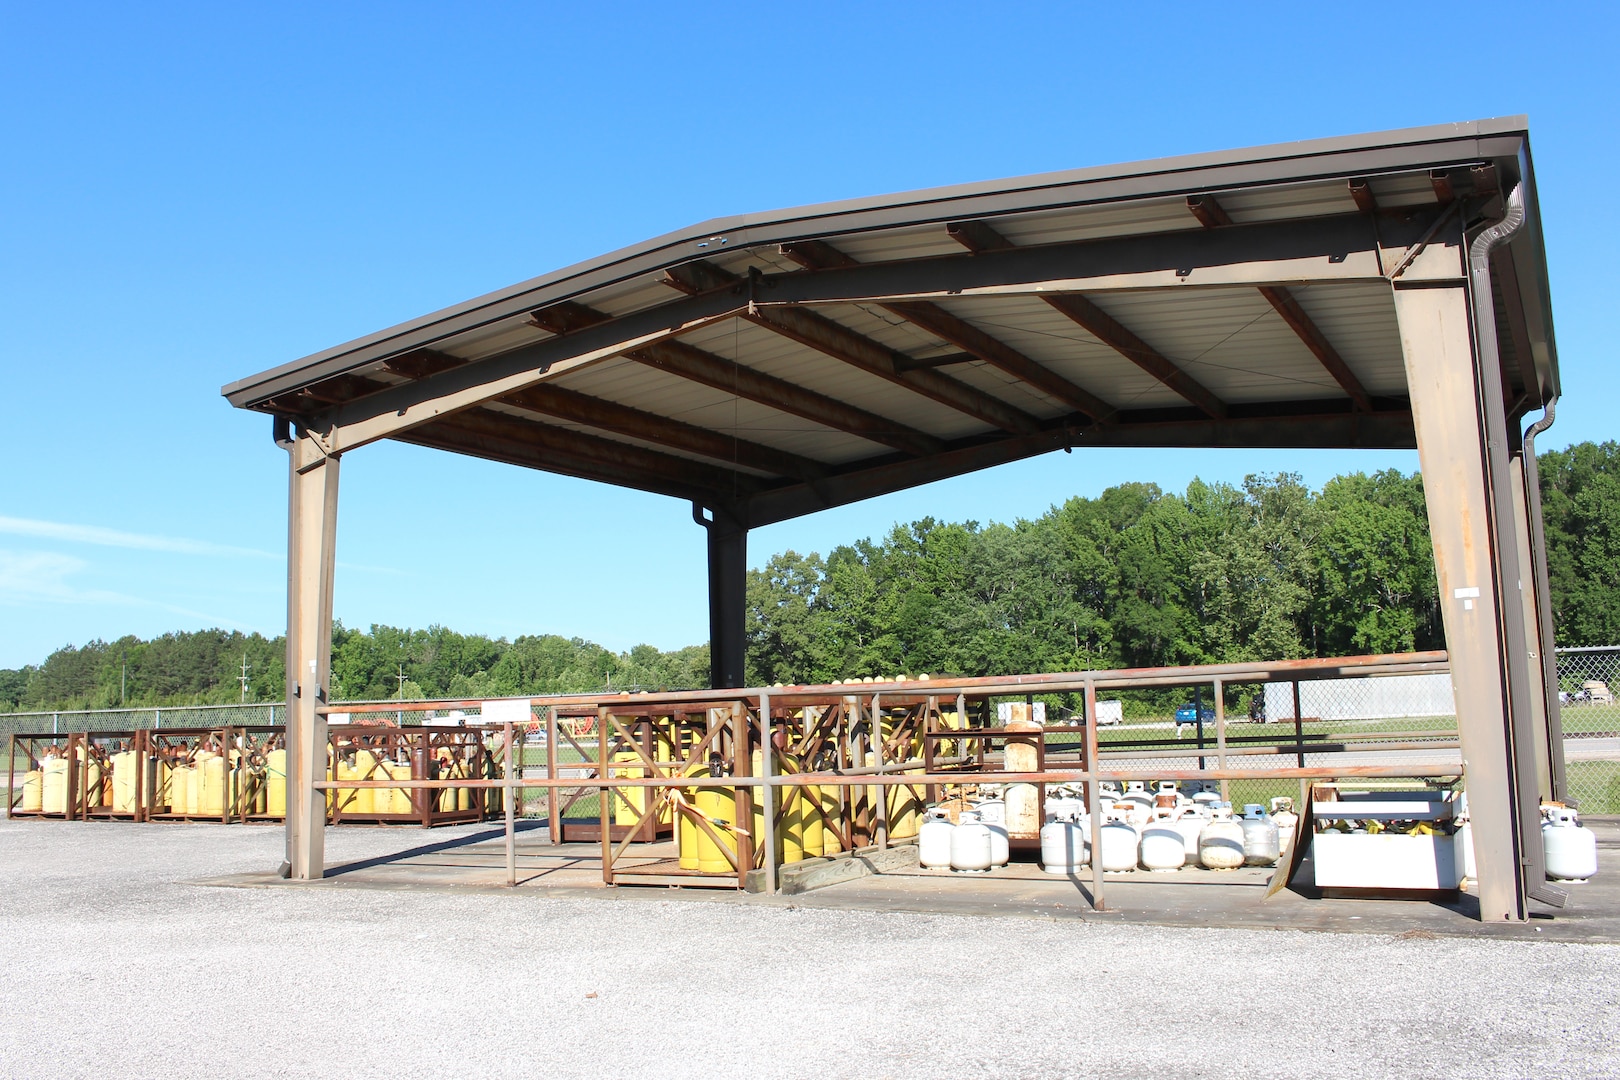 Hazardous materials are stored under a metal canopy at the HAZMART Pharmacy, pictured here June 15, 2021, at Arnold AFB, Tenn. The HAZMART Pharmacy distributes these materials and products to the shops requesting them. The facility is used by the Hazardous Waste and Hazardous Materials Program at Arnold to provide cradle-to-grave management of hazardous waste. (U.S. Air Force photo by Deidre Moon)